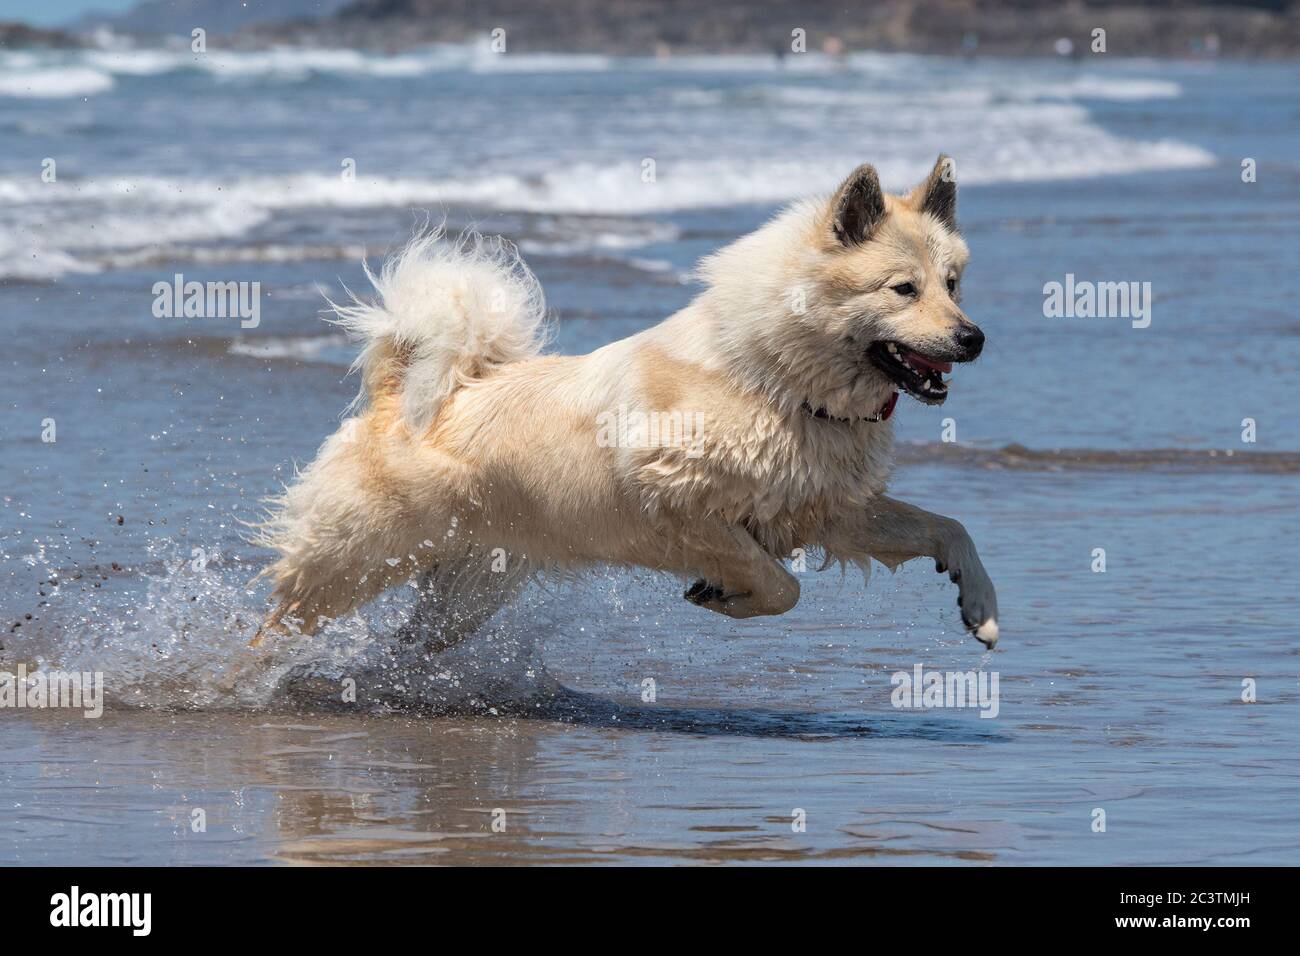 Cane Eurasier in spiaggia in vacanza Foto Stock